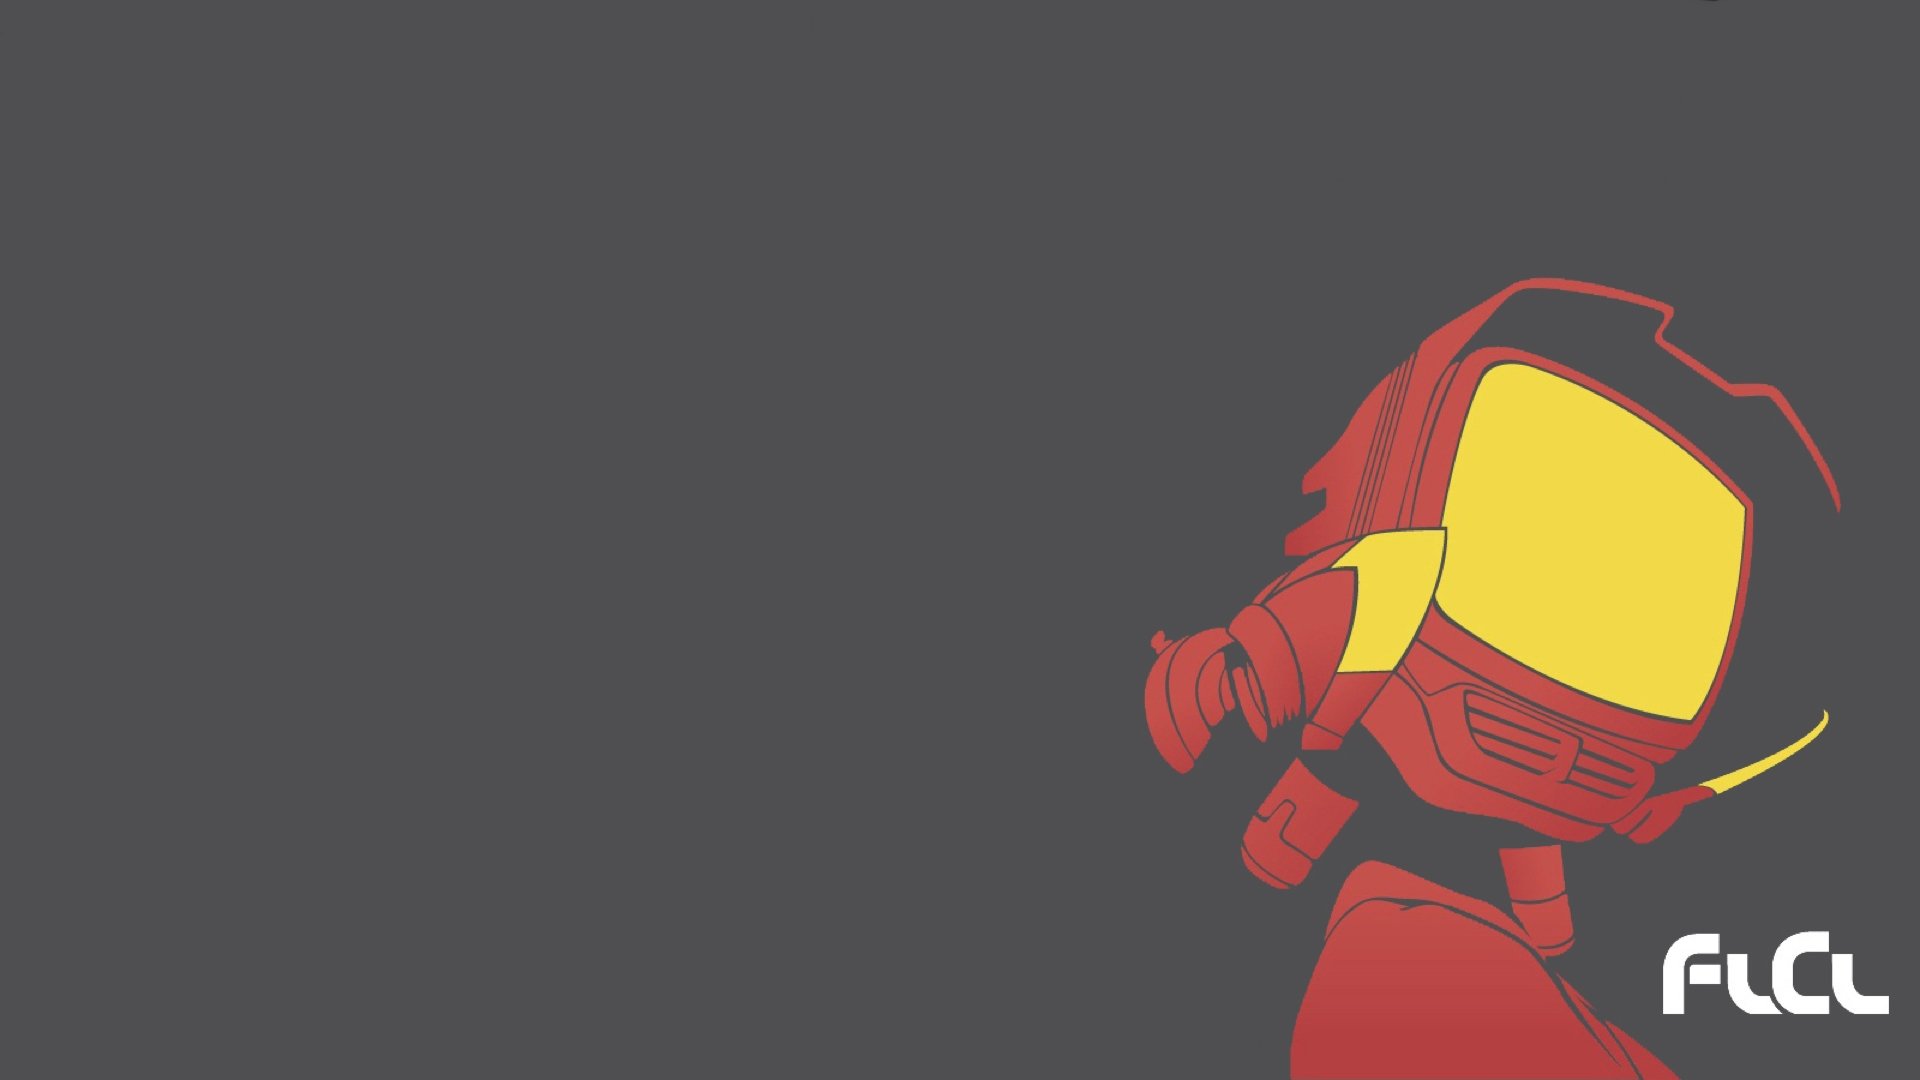 Flcl Fooly Cooly Canti Simple Background Wallpaper